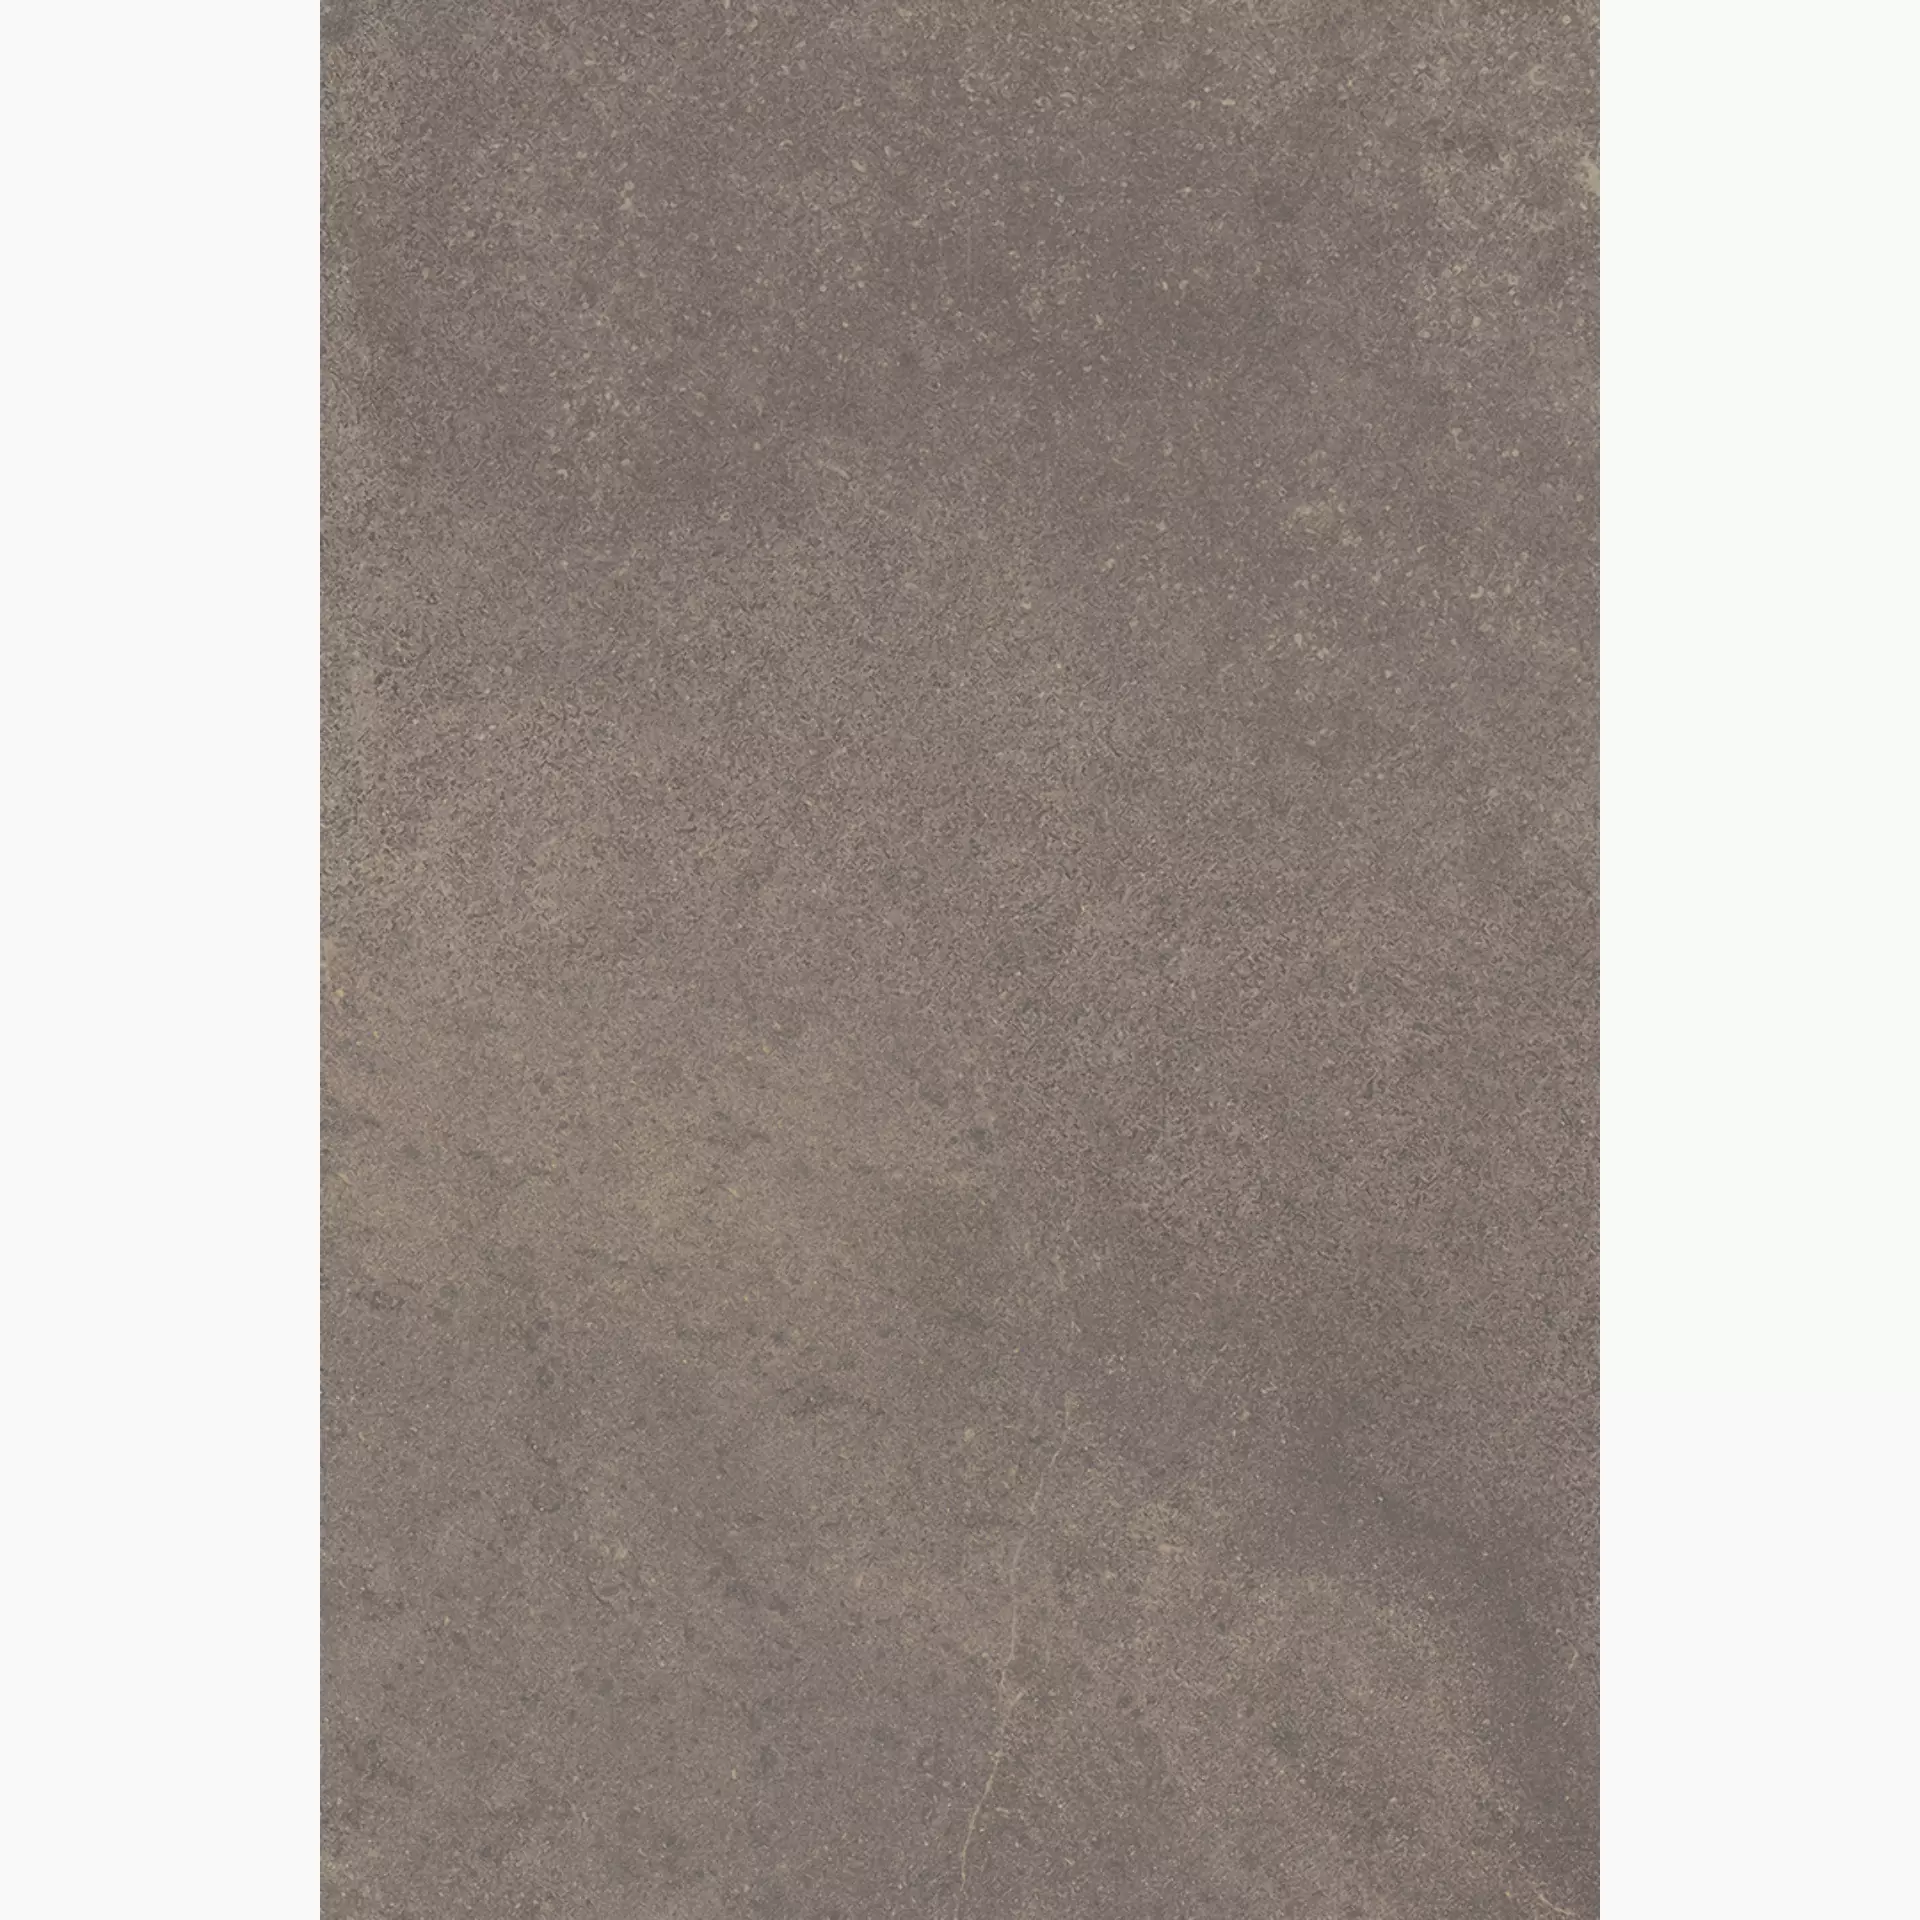 Fondovalle Planeto Mars Natural PNT289 30x60cm rectified 8,5mm